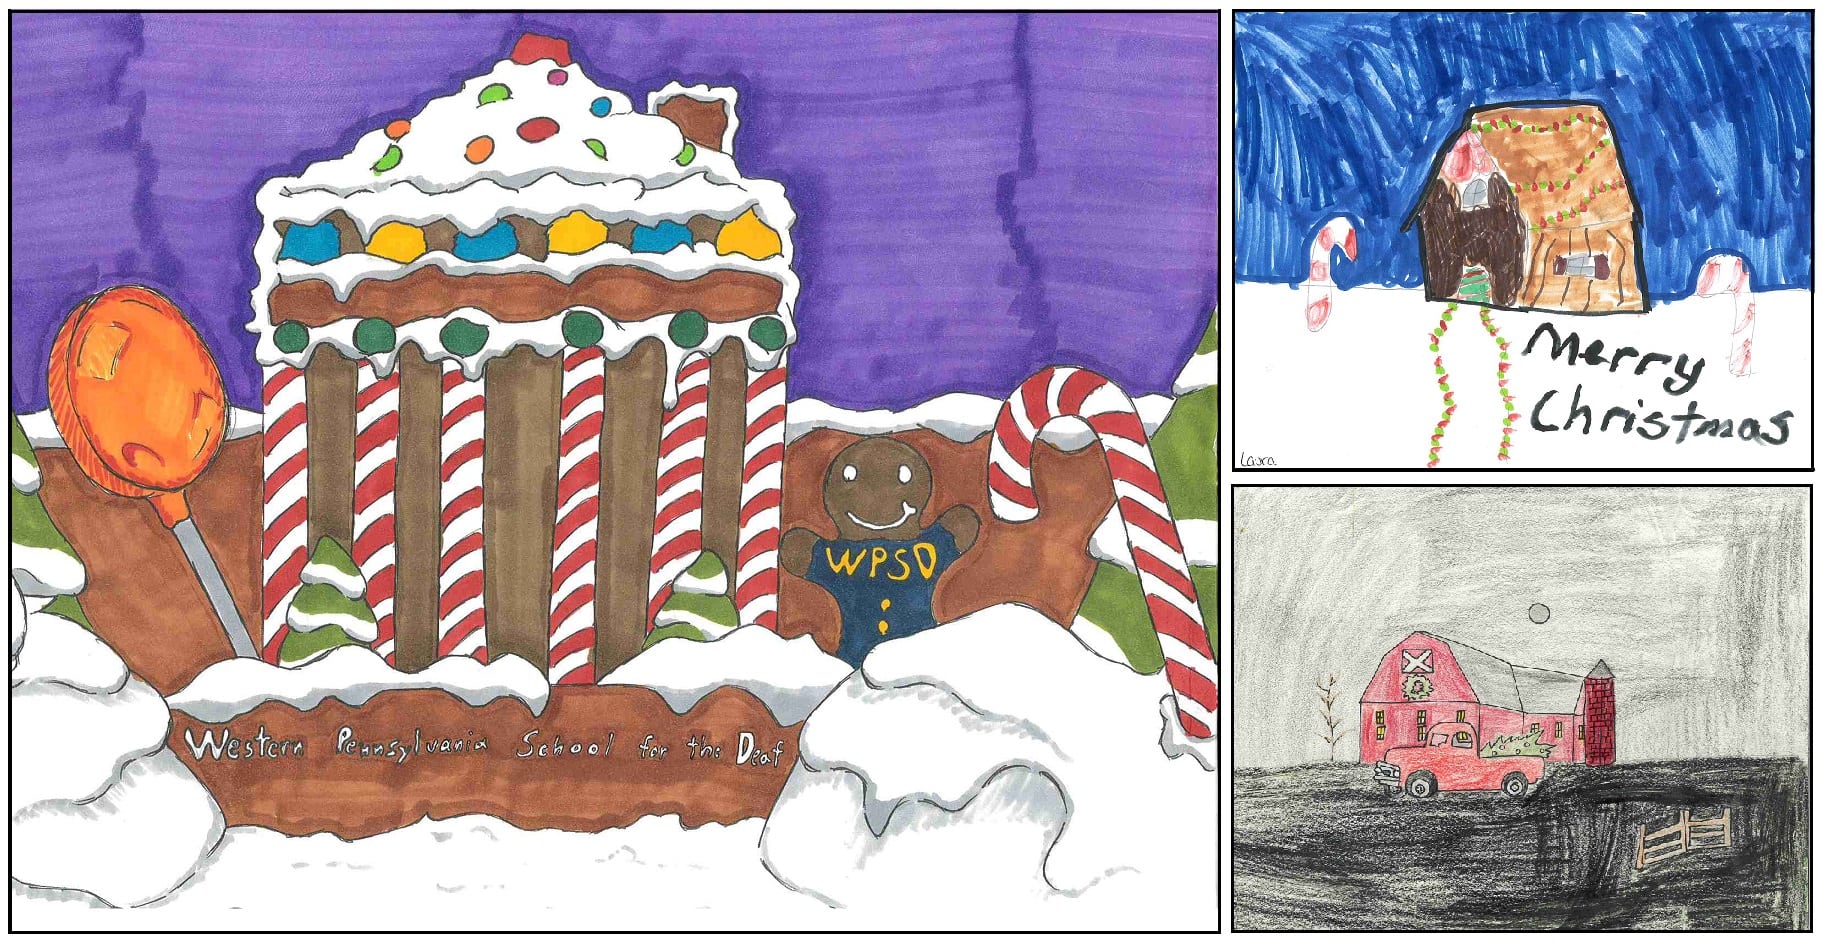 Students artwork showing winter scenes, including a gingerbread house and the exterior of the Western Pennsylvania School for the Deaf